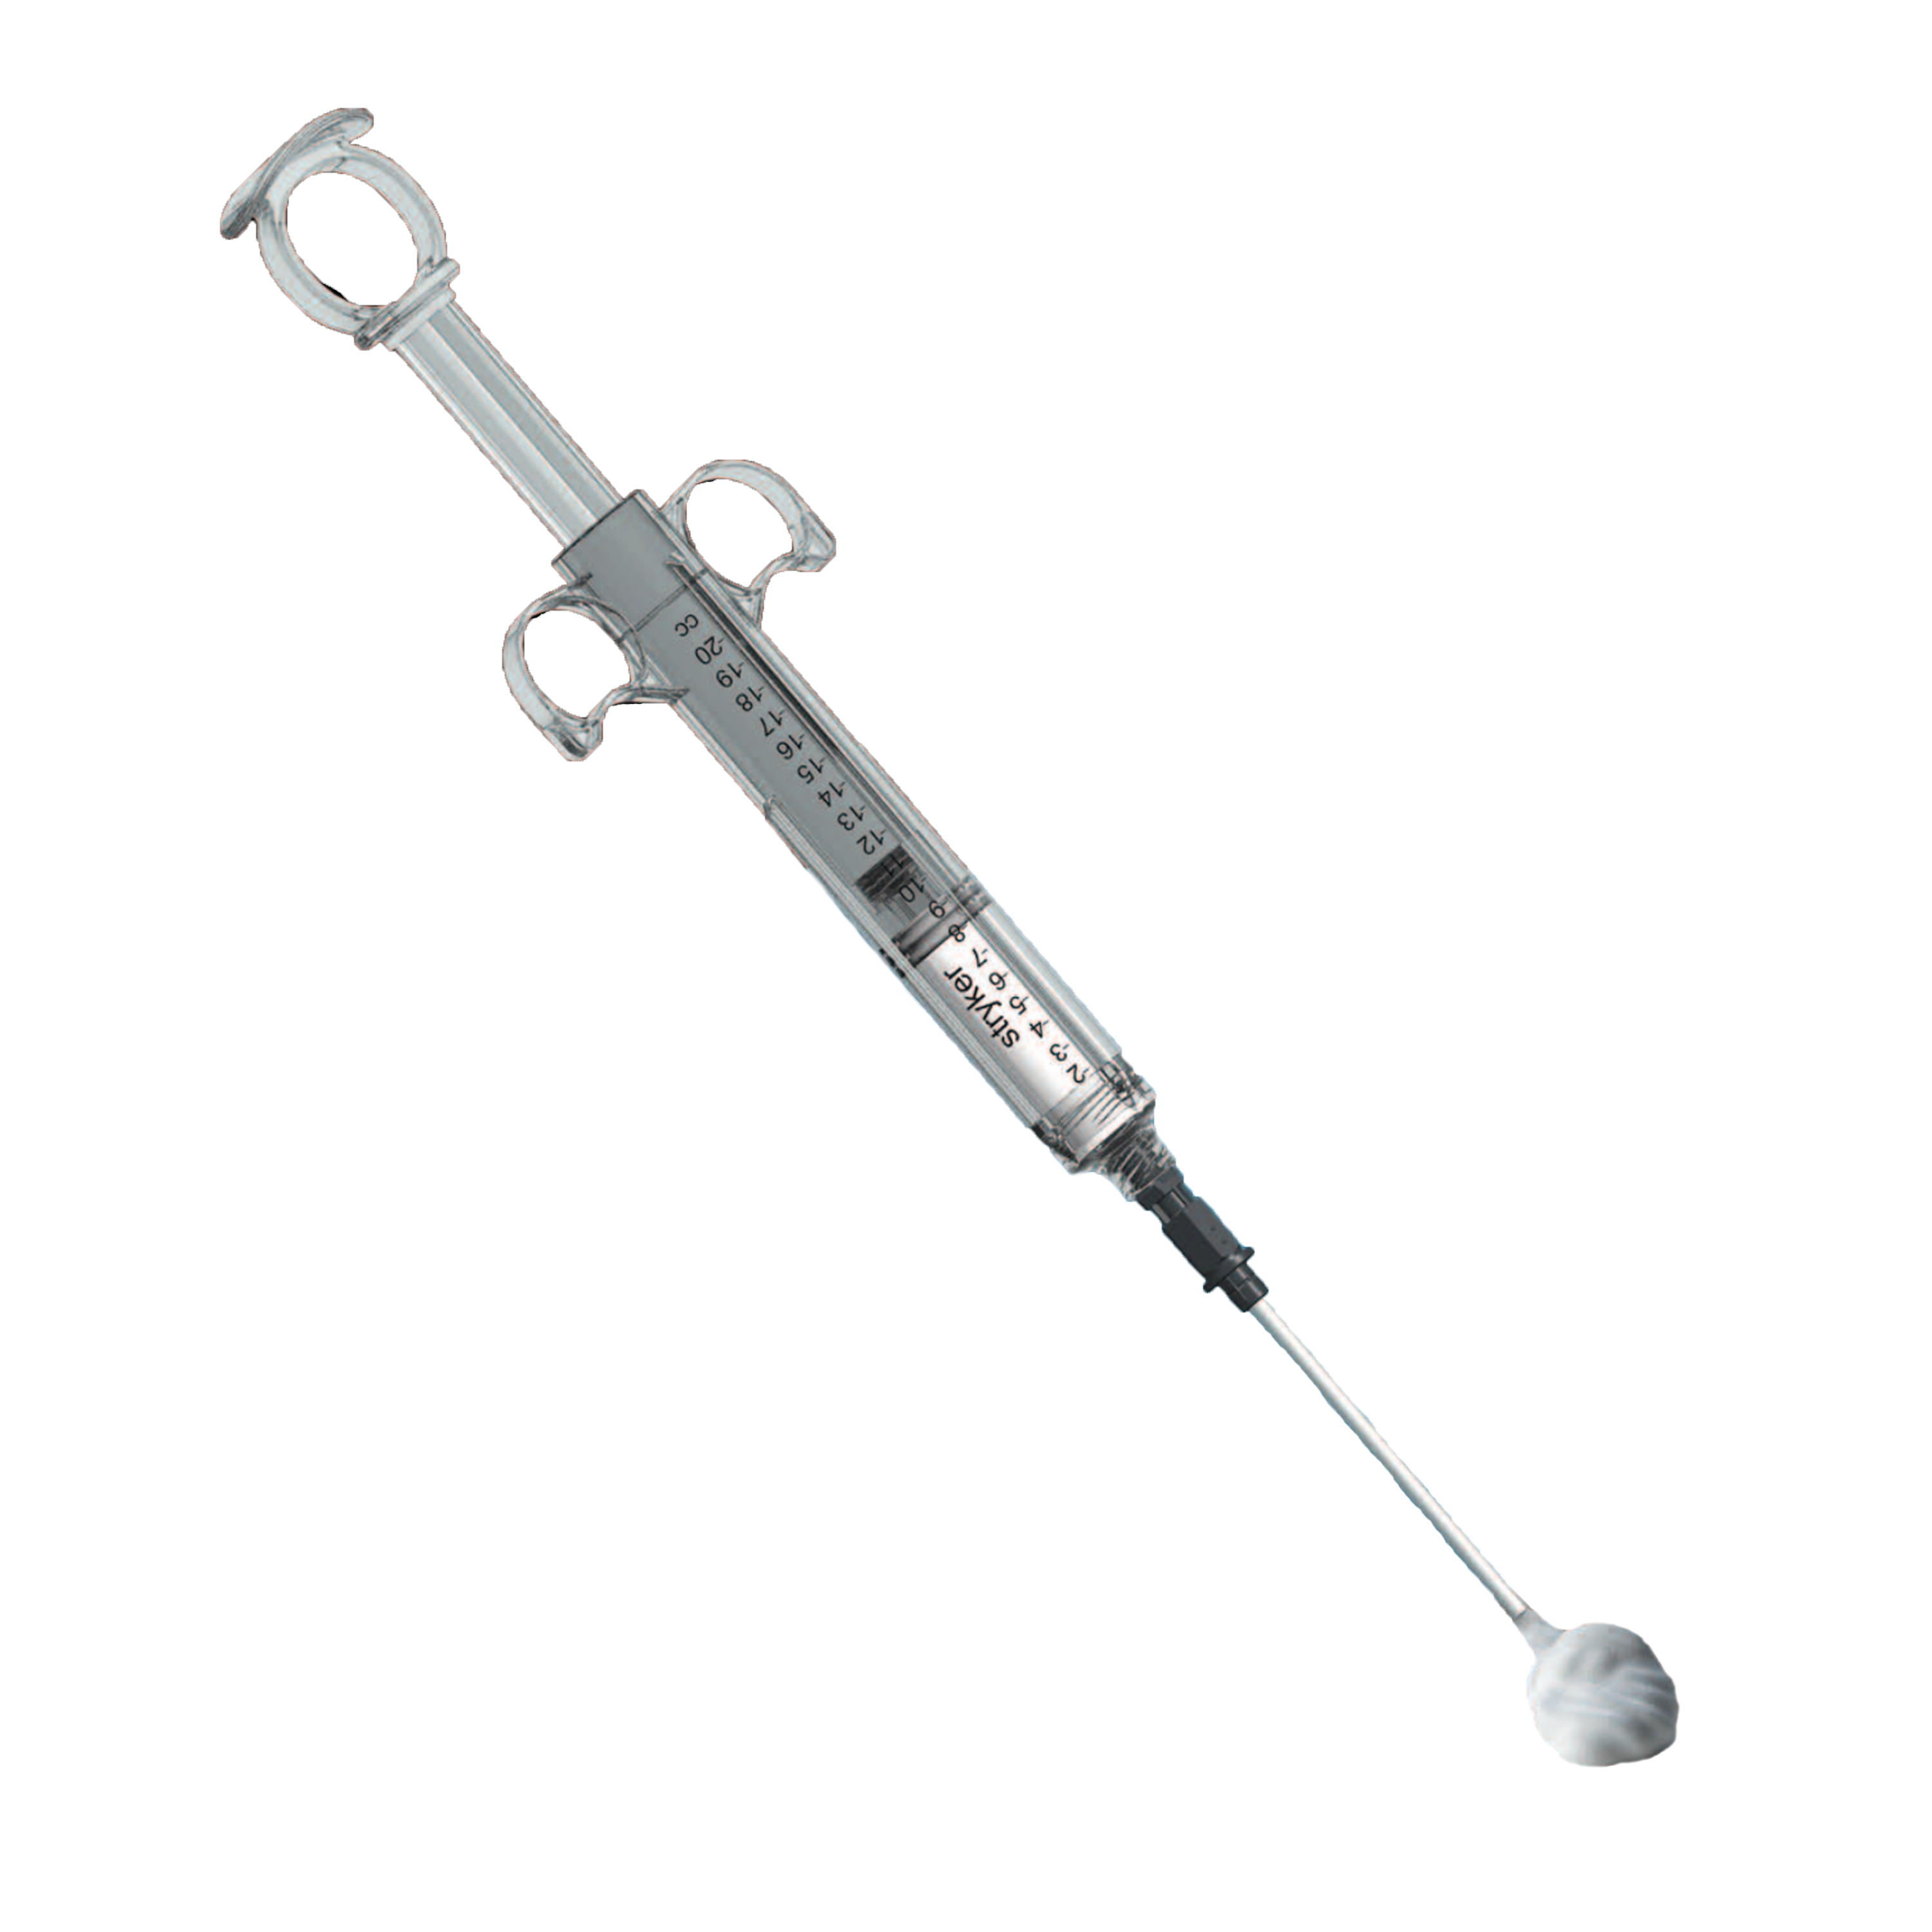 HydroSet Bone Void Substitute | HydroSet represents the next generation in bone substitute technology intended for a wide variety of clinical applications in multiple surgical specialties.